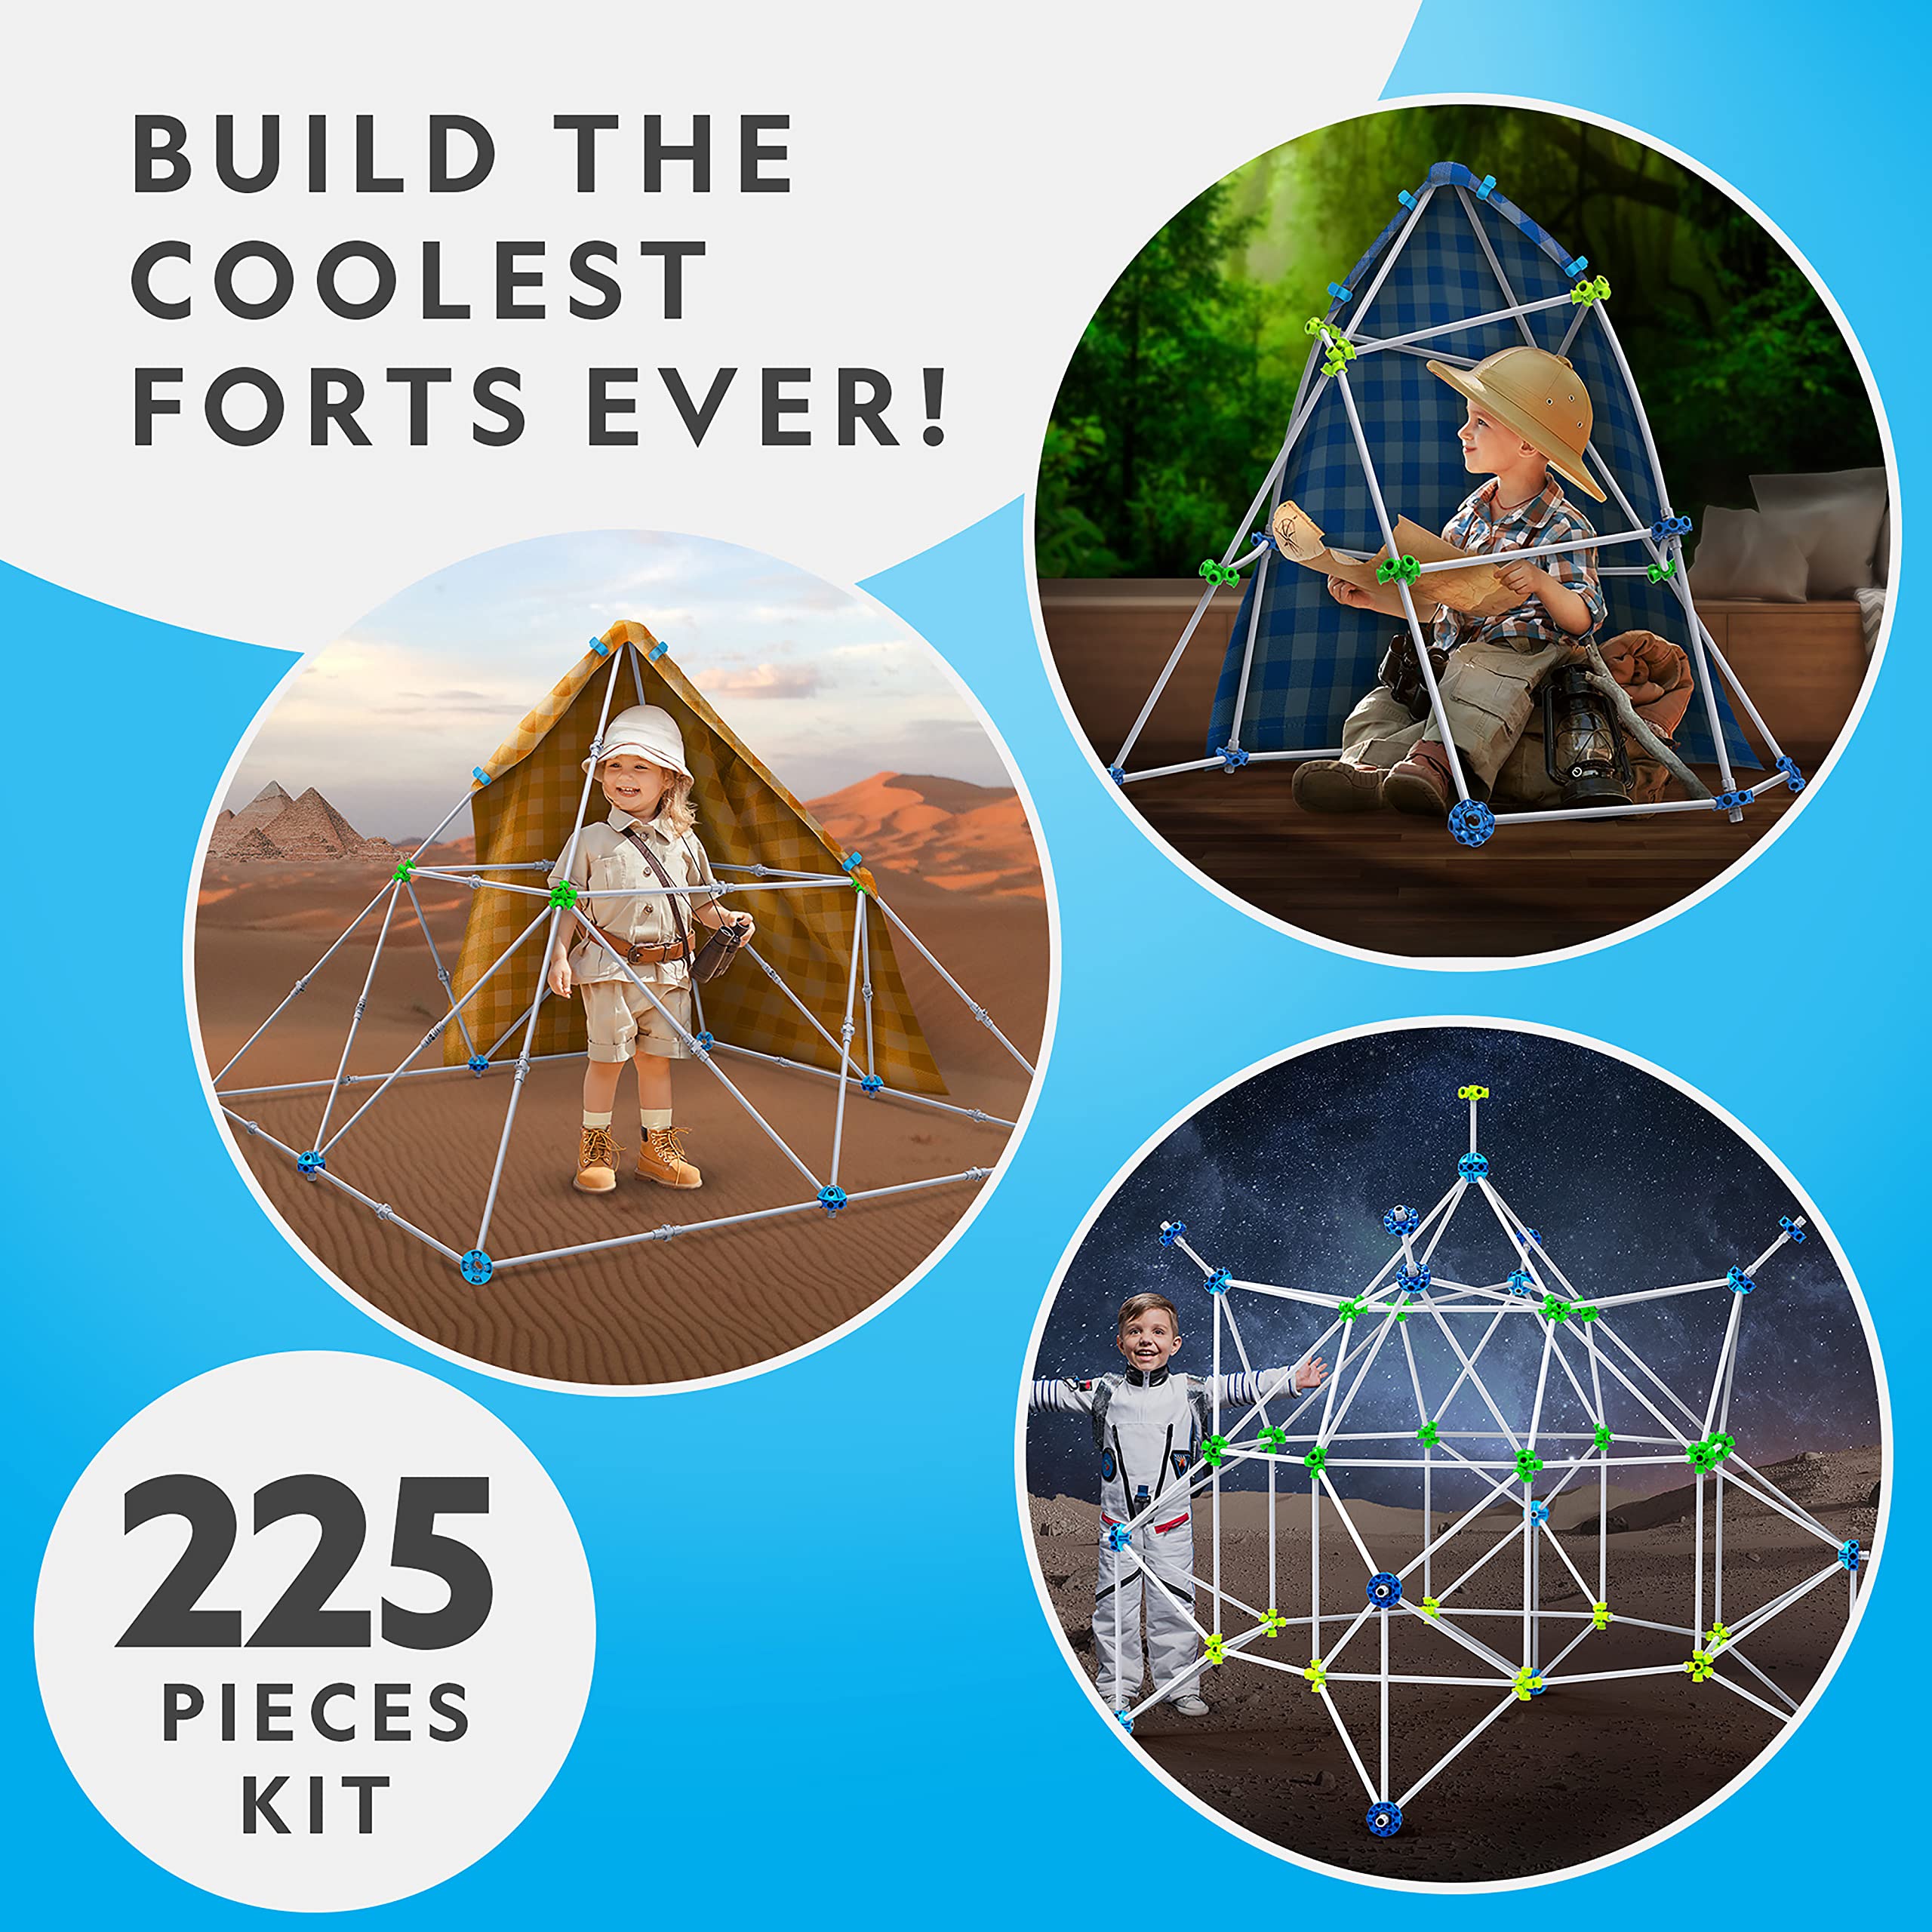 NATIONAL GEOGRAPHIC Kids Fort Building Kit - 225-Piece Indoor Fort Builder for Kids, Build a Fort for Creative Play, STEM Building Toy, Fort Building Kit for Kids 6-10, Blanket Fort (Amazon Exclusive)